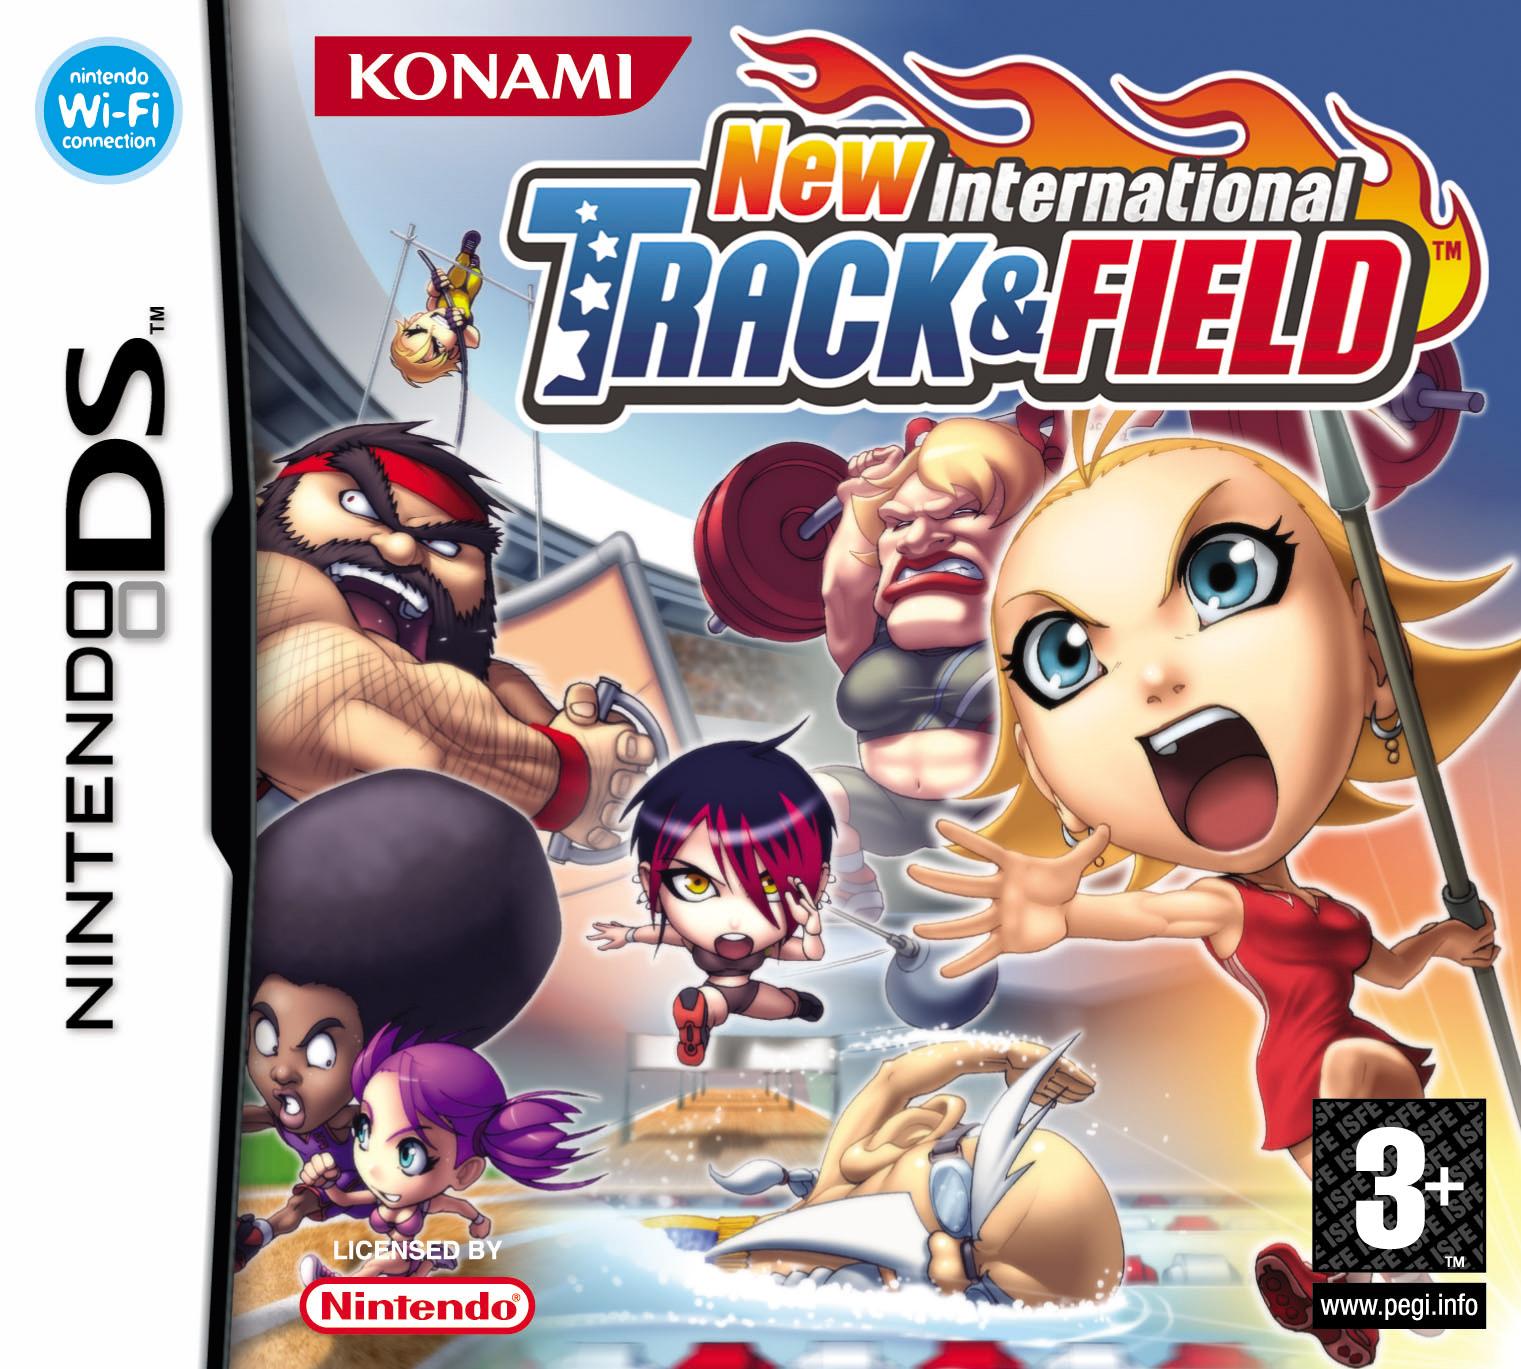 New International Track And Field for NINTENDODS to buy